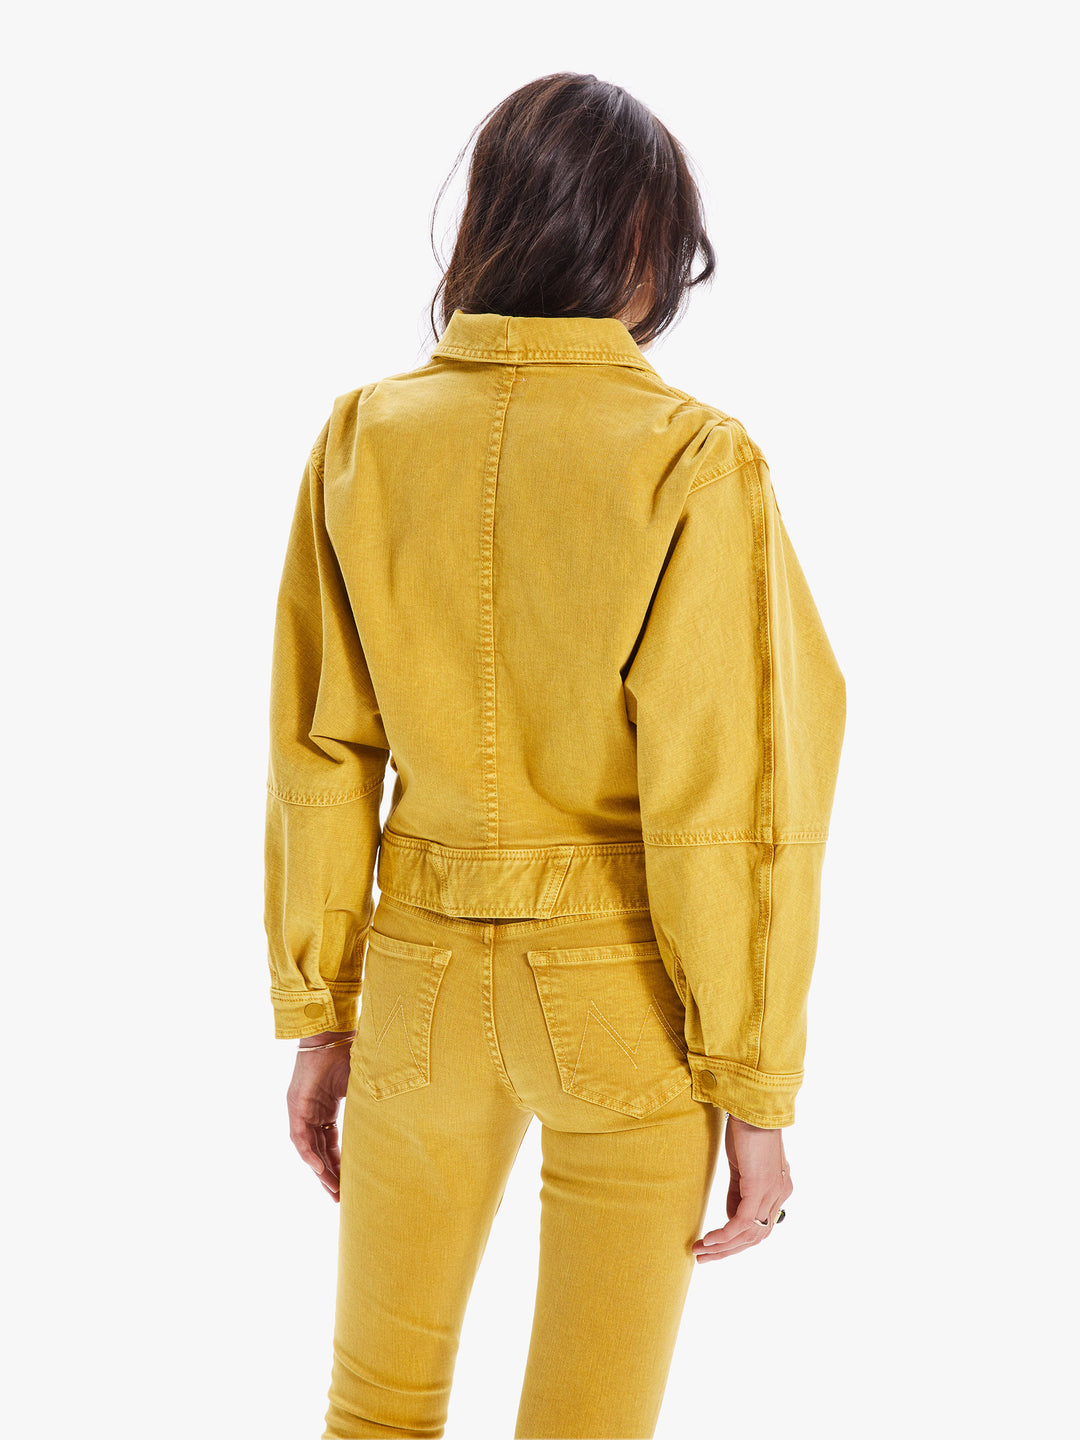 Mother - The Big Time Jacket in Mineral Yellow